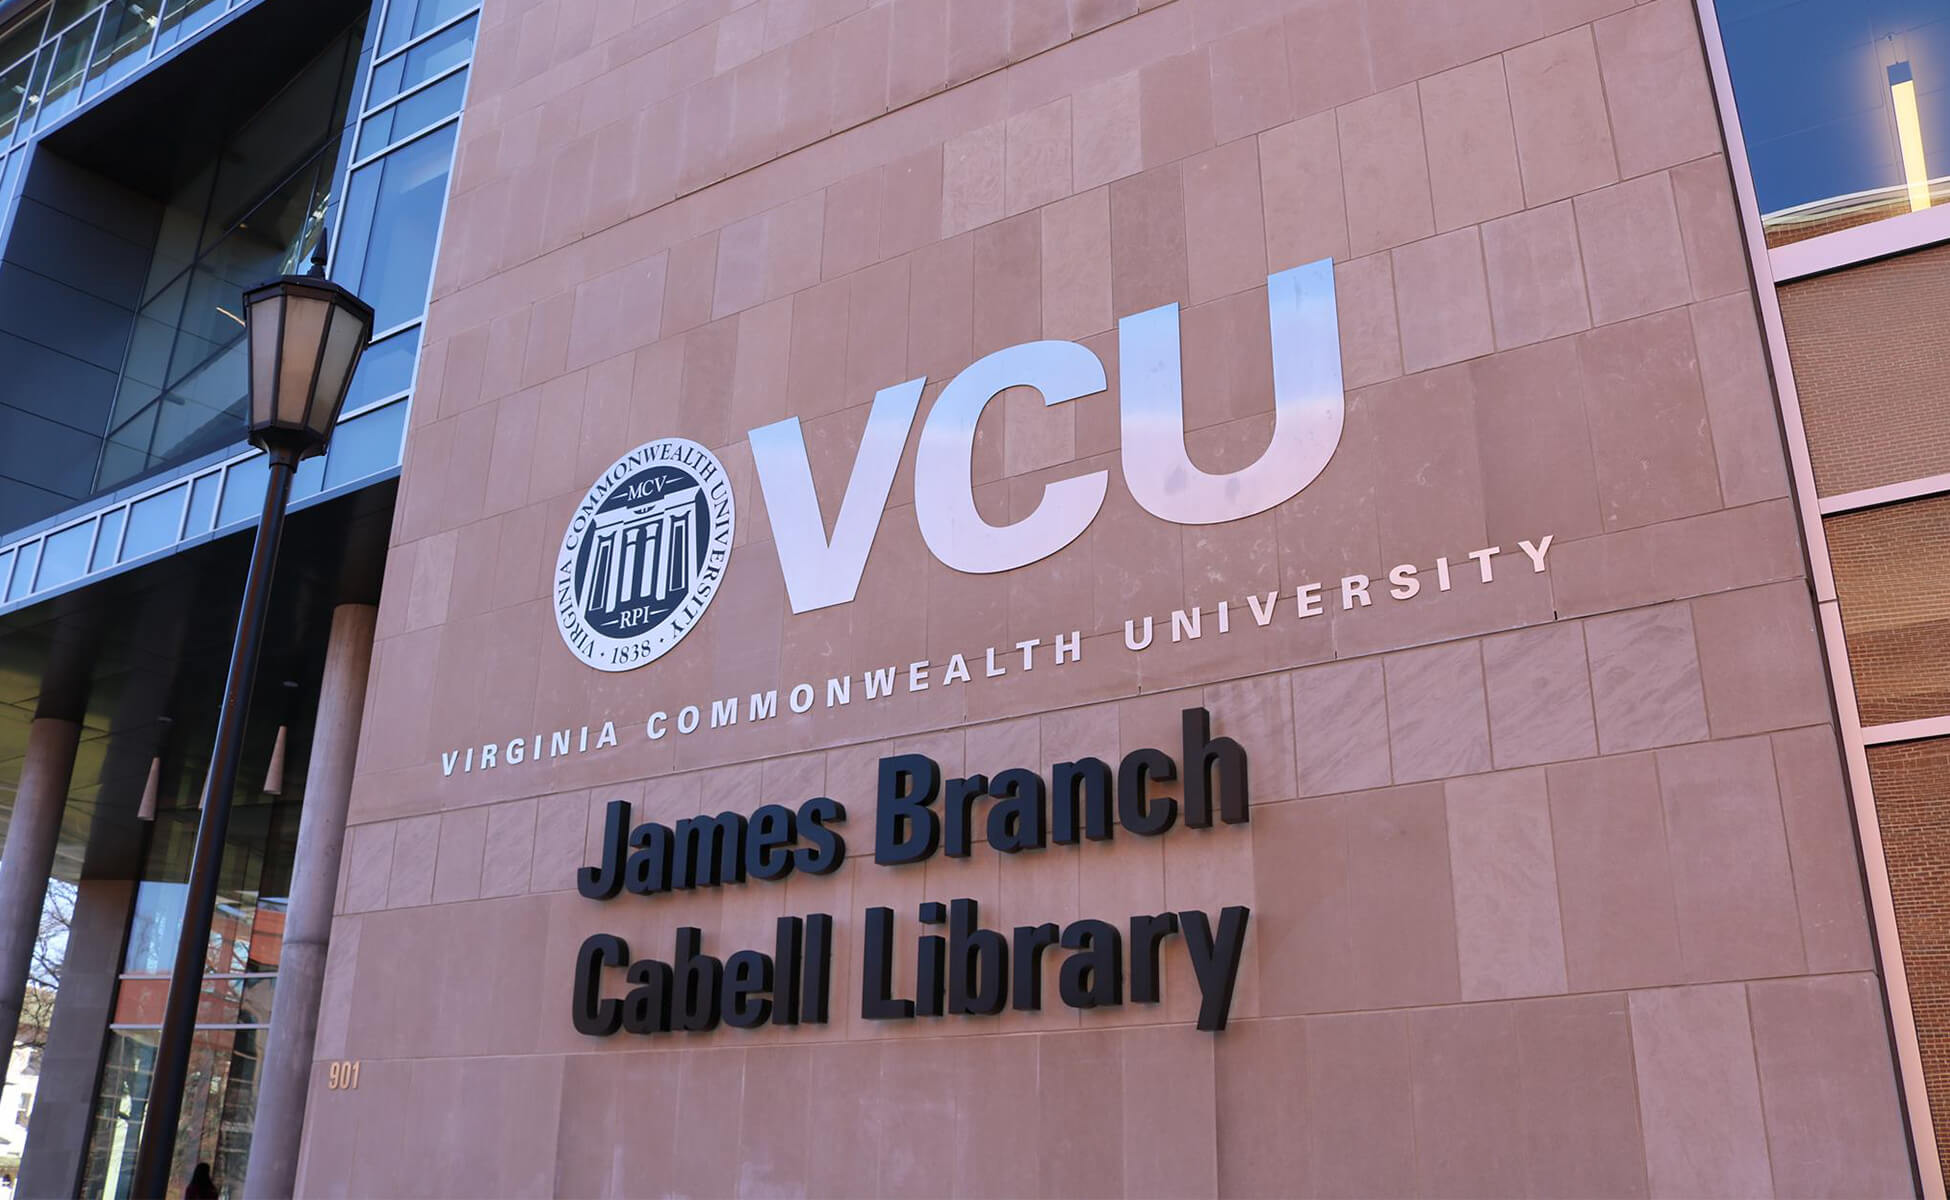 Chewning and Wilmer | Projects | VCU Cabell Library